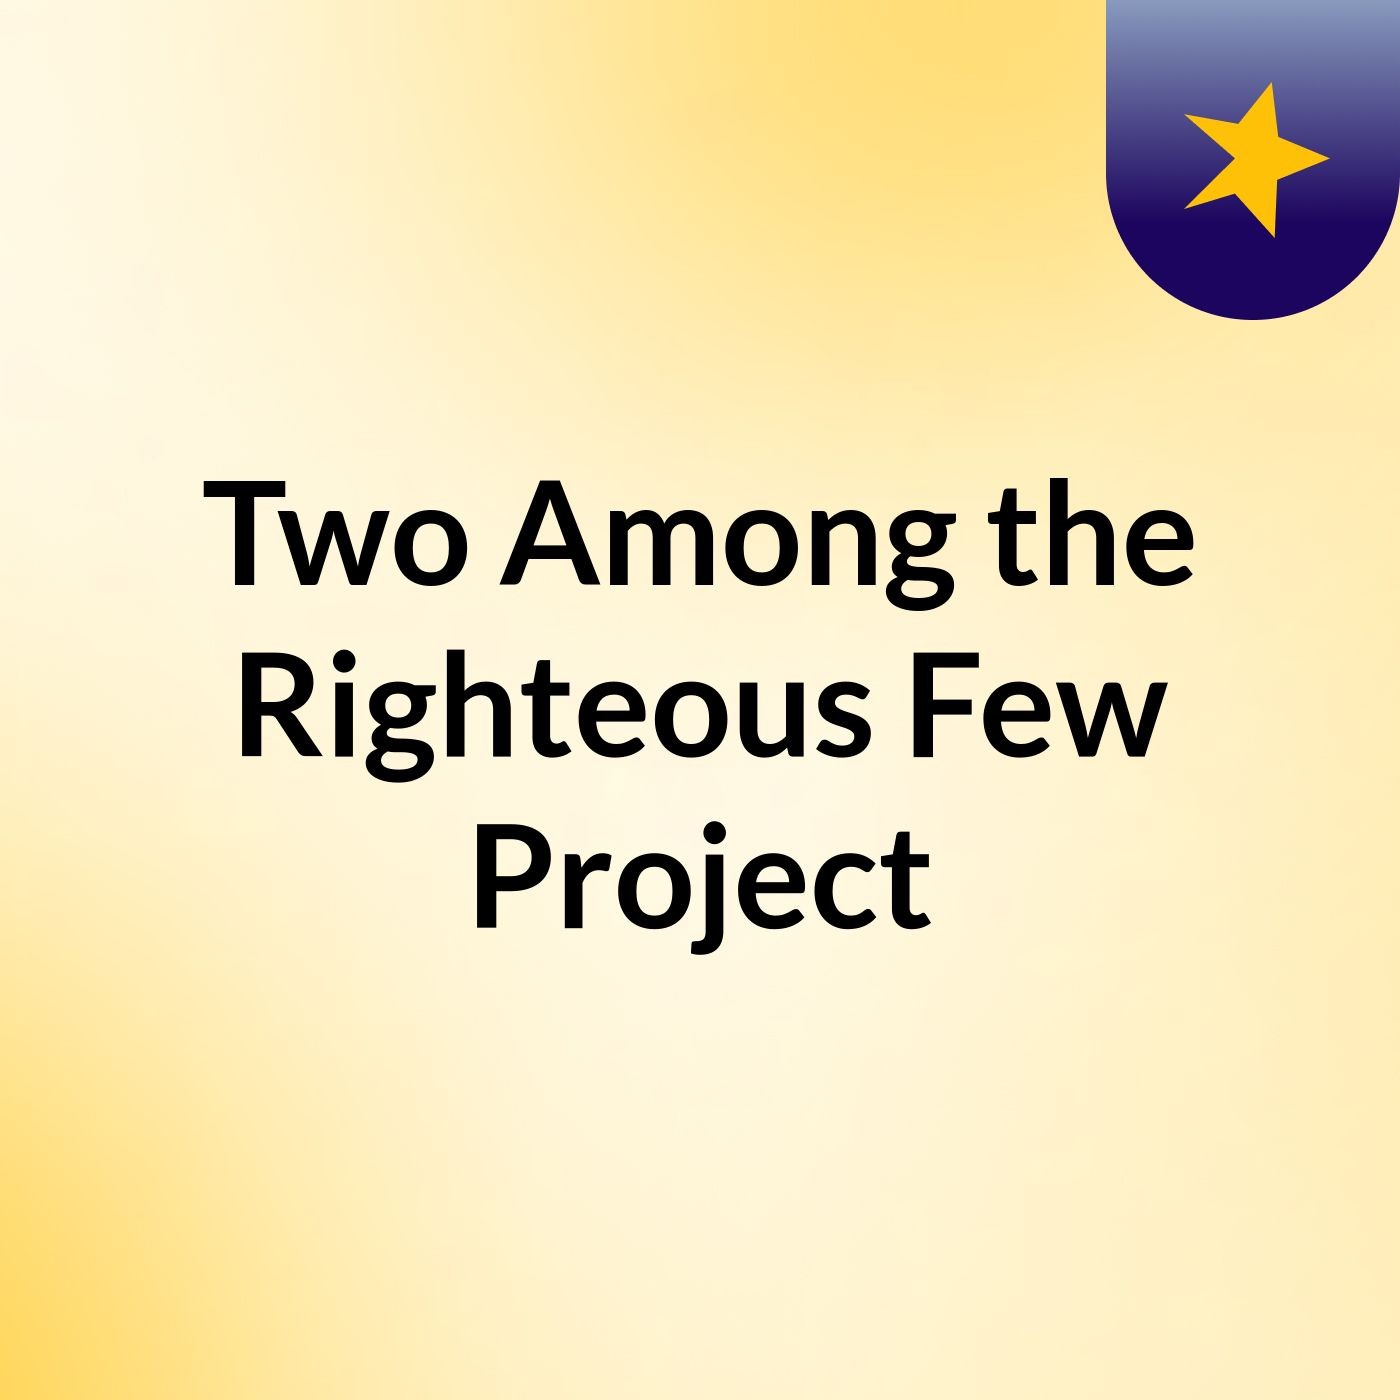 'Two Among the Righteous Few' Project